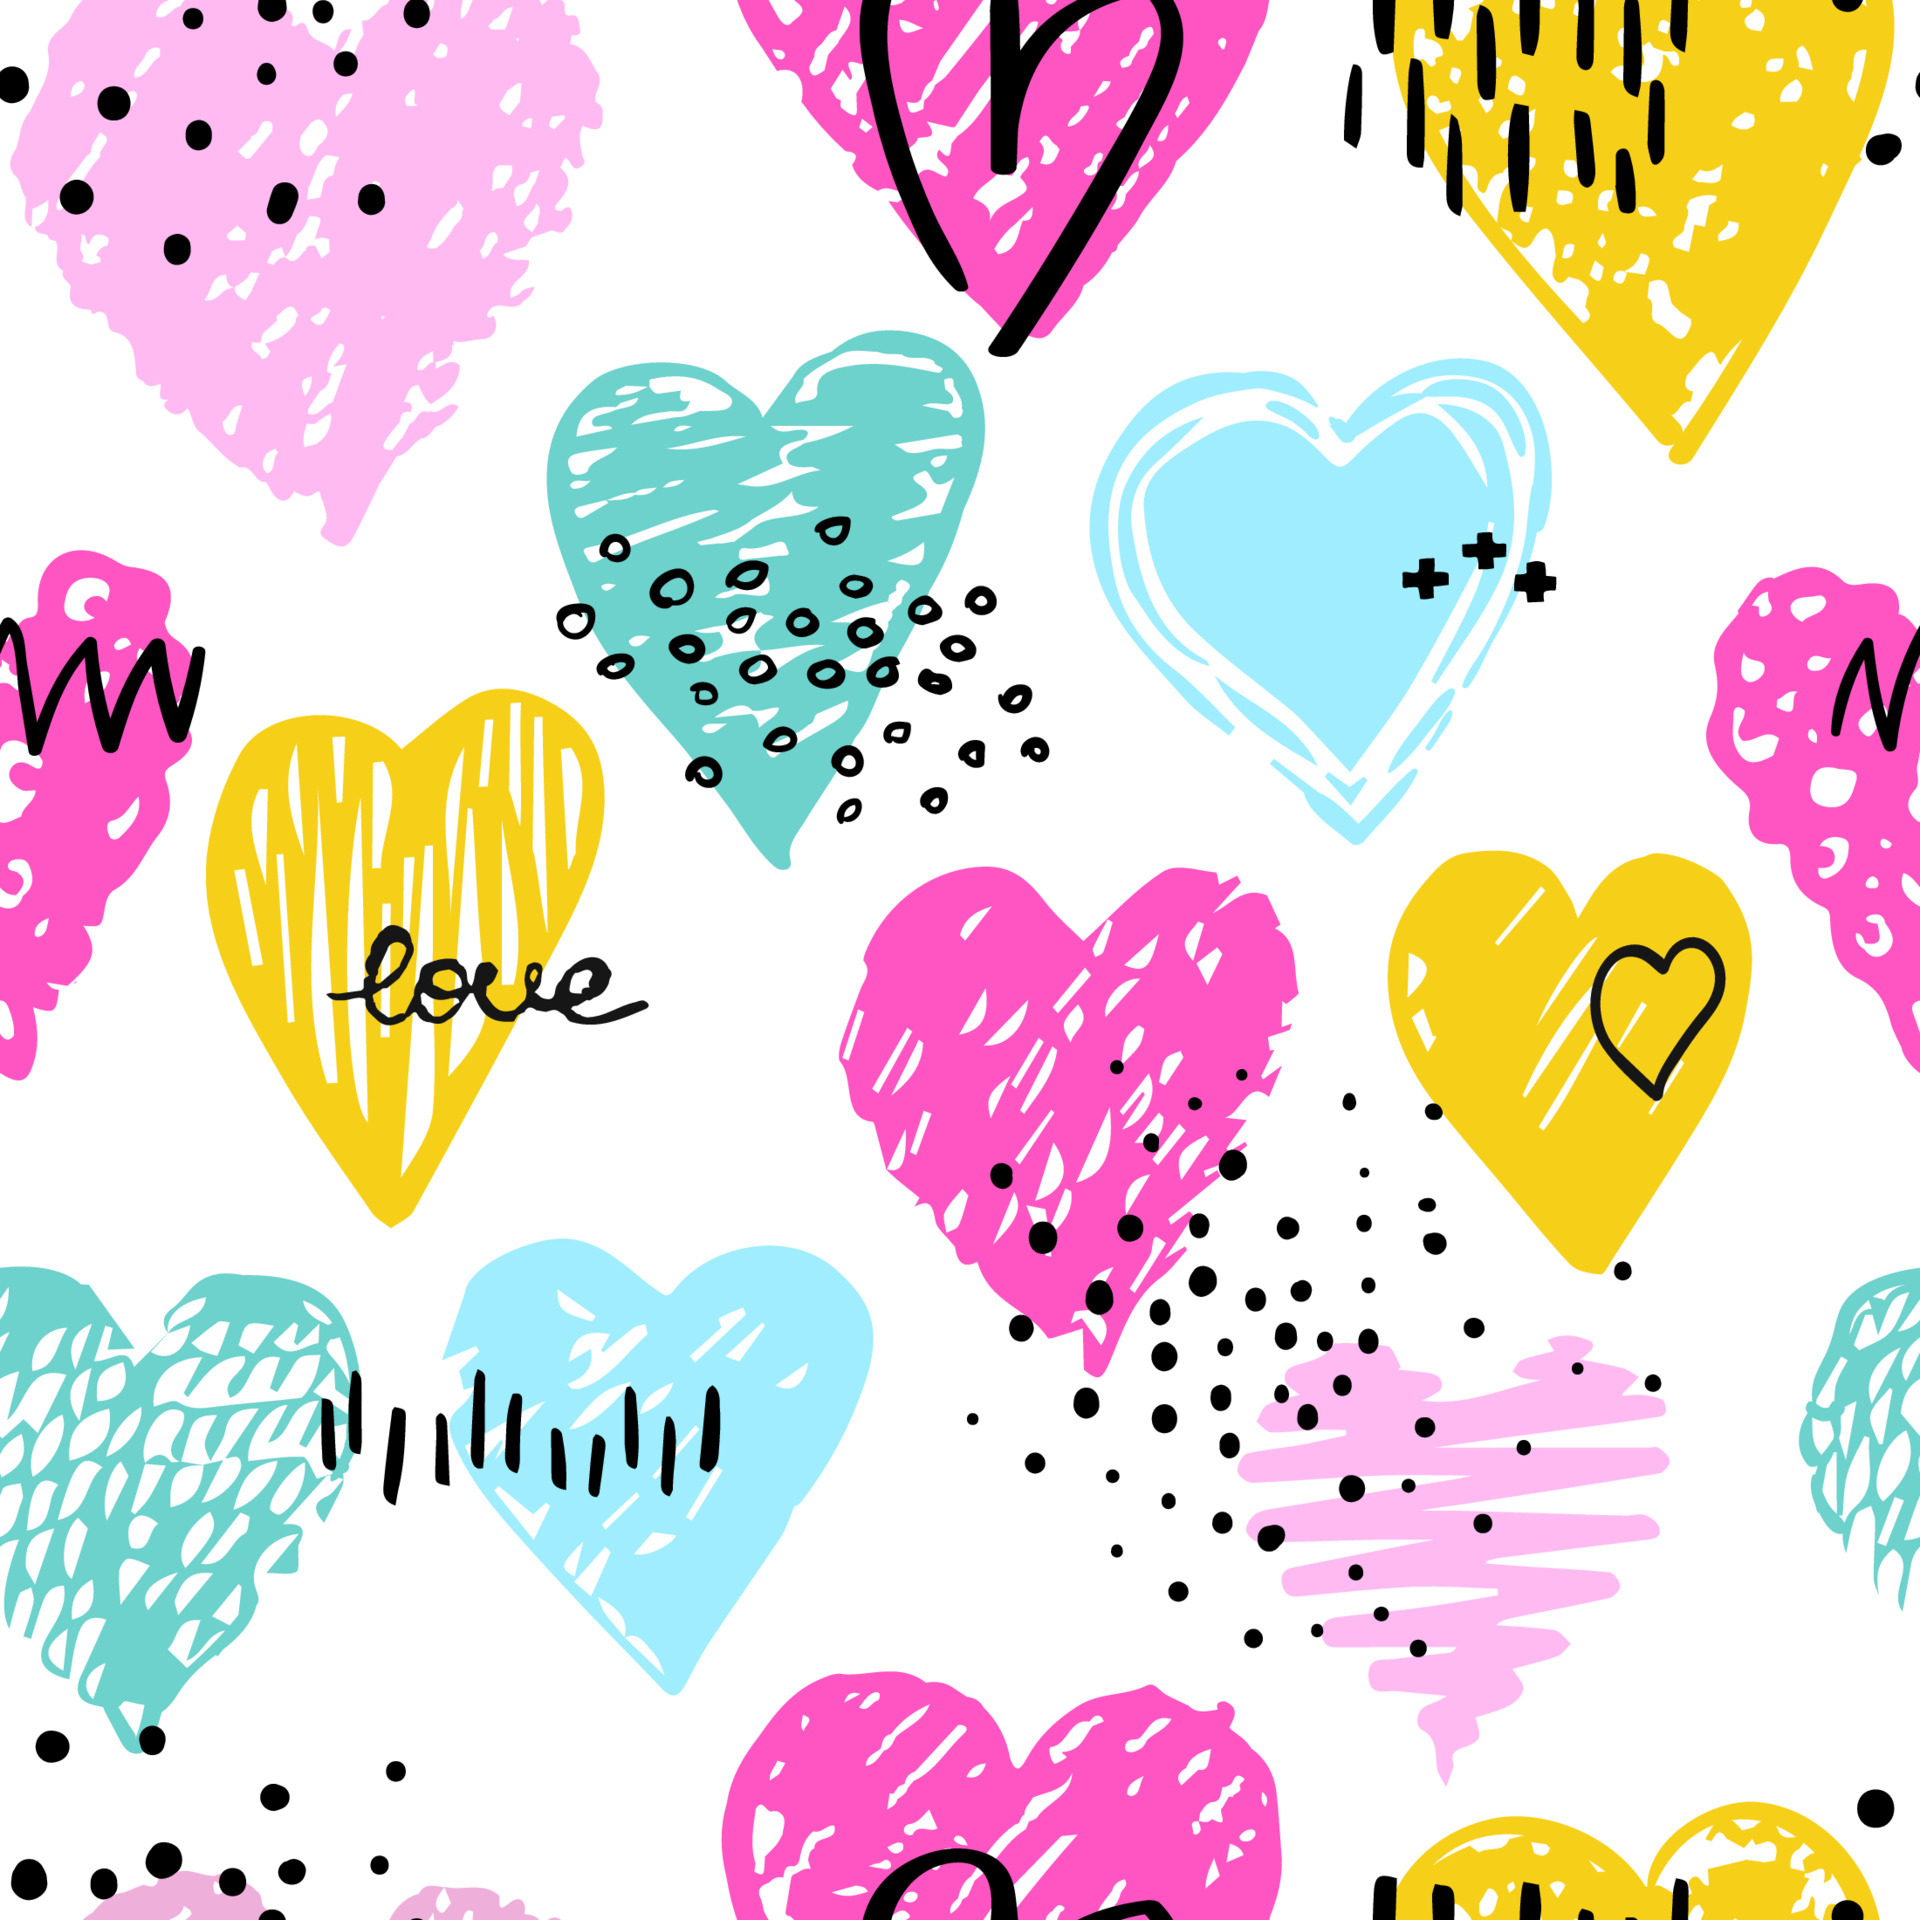 Abstract Hearts Wallpaper  3D and CG  Abstract Background Wallpapers on  Desktop Nexus Image 1189817